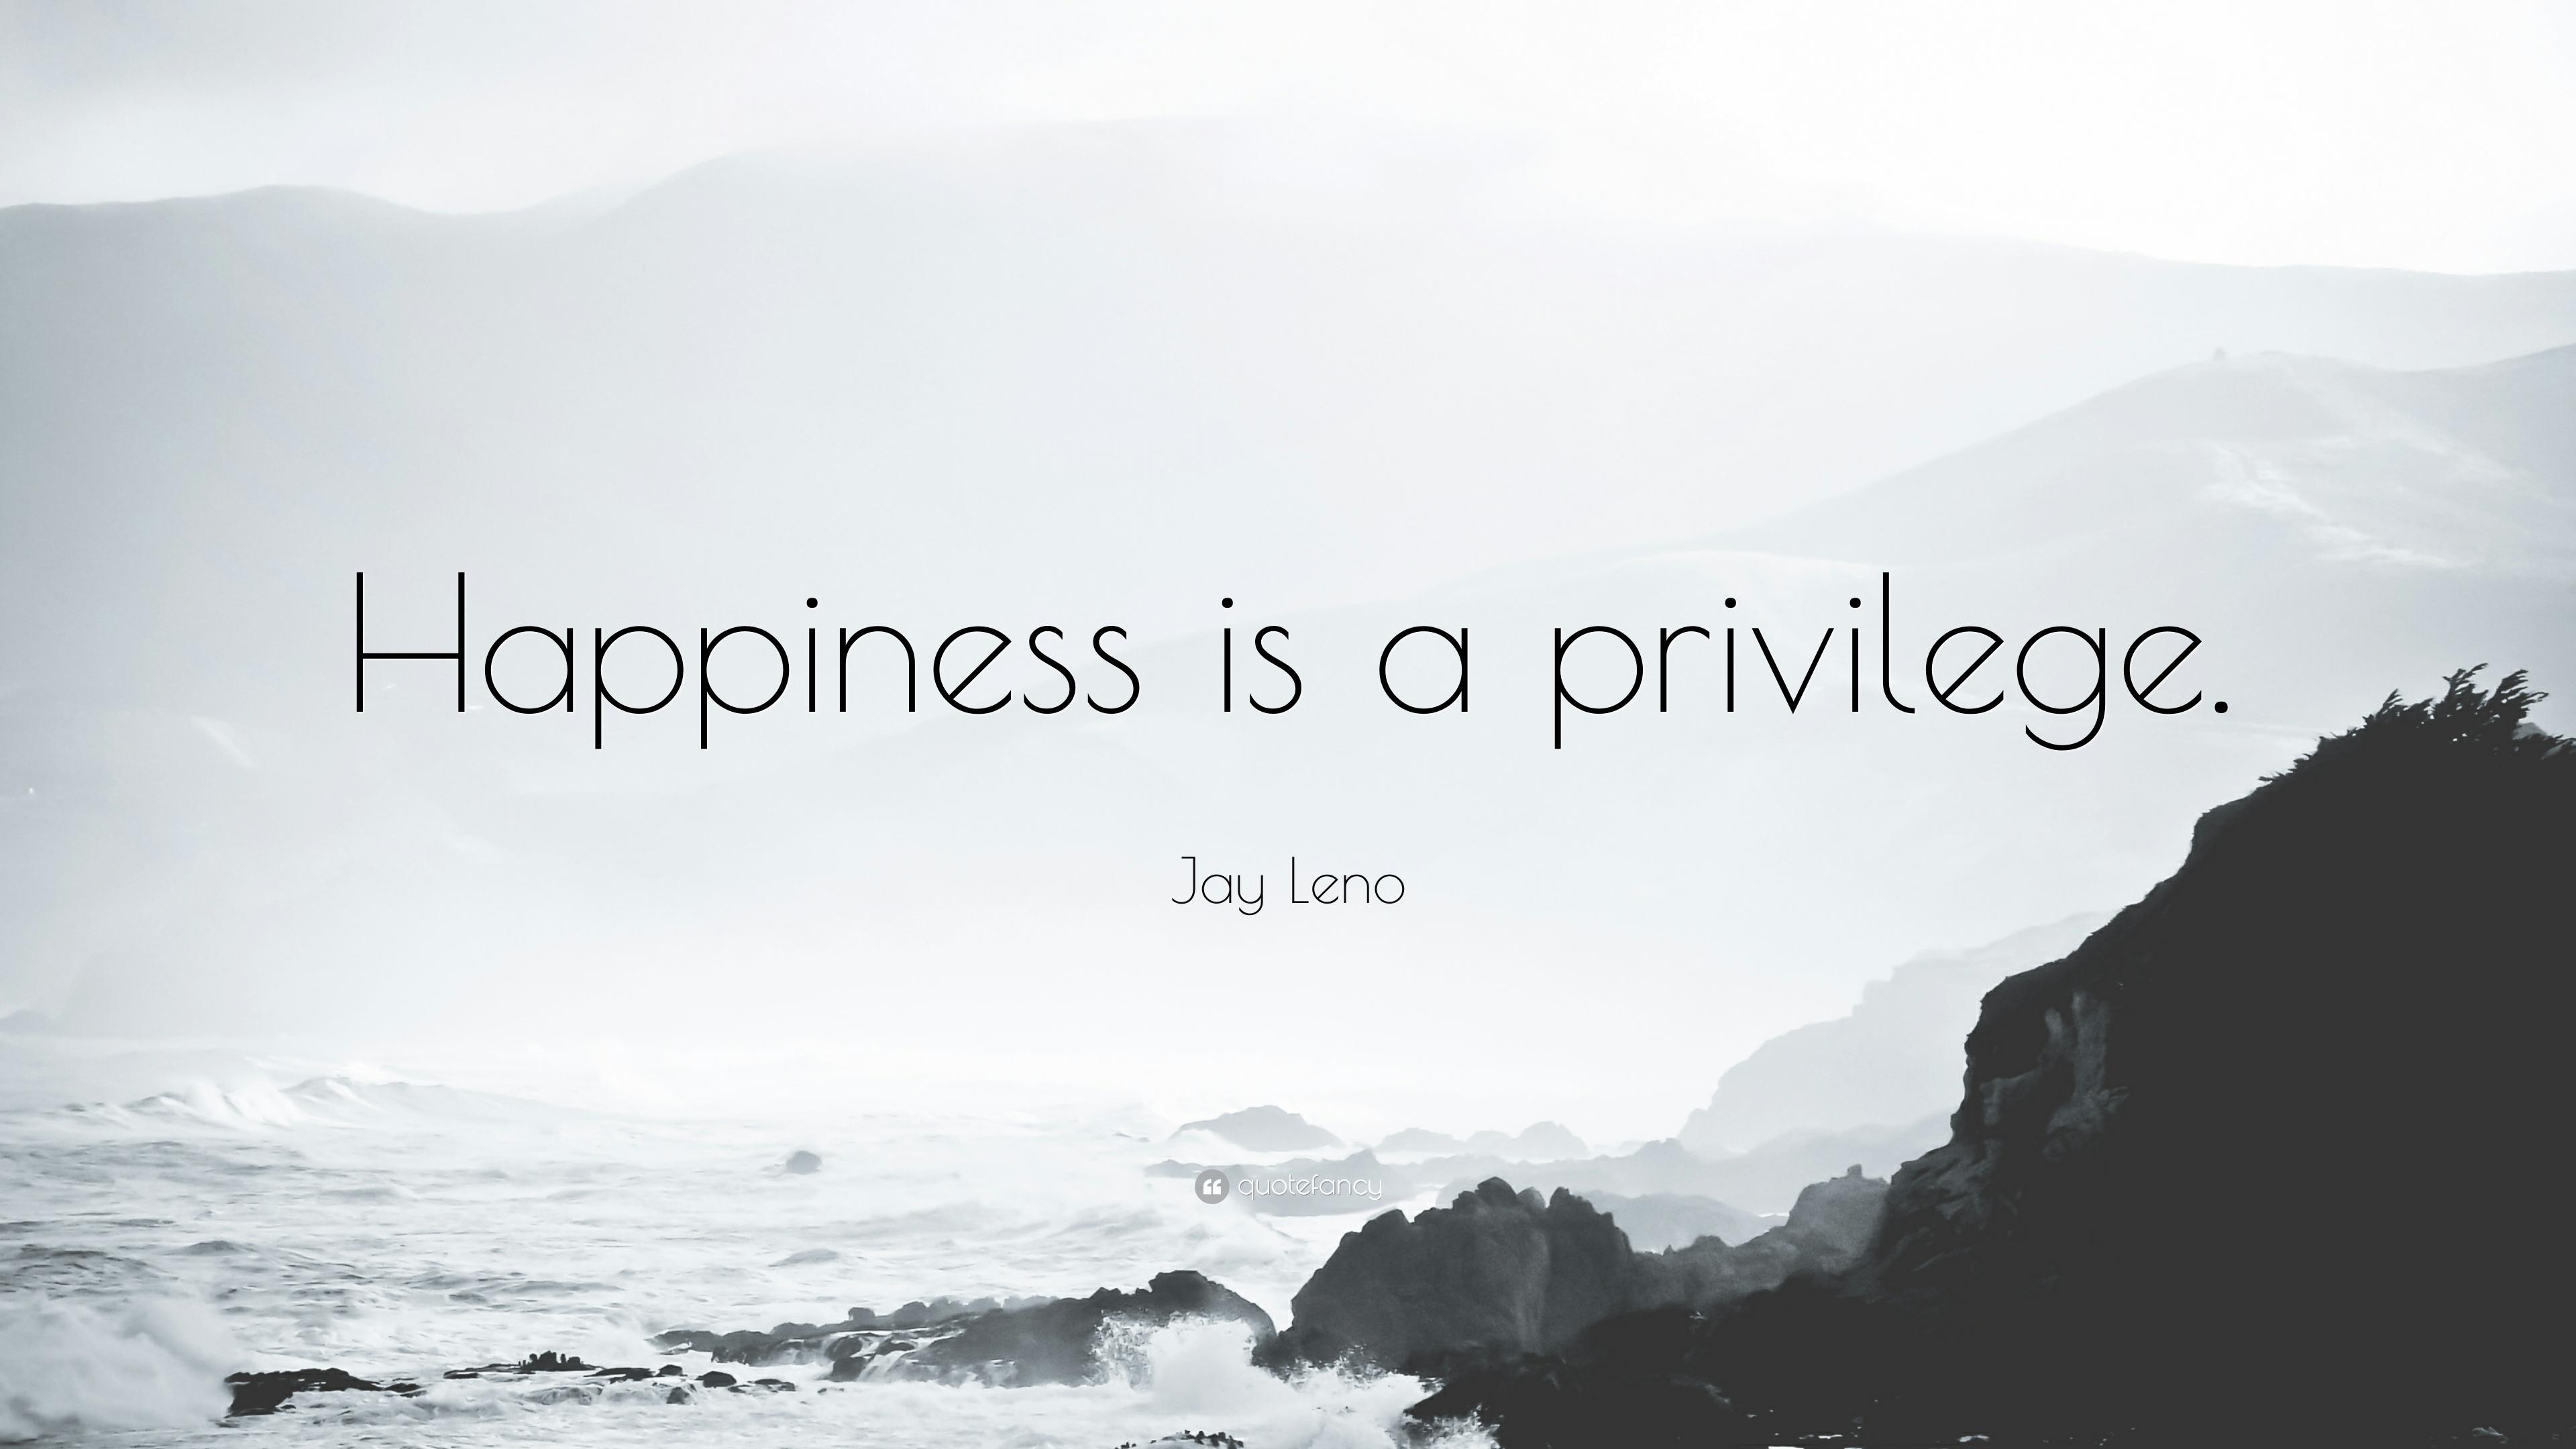 Jay Leno Quote: “Happiness is a privilege.” (7 wallpaper)